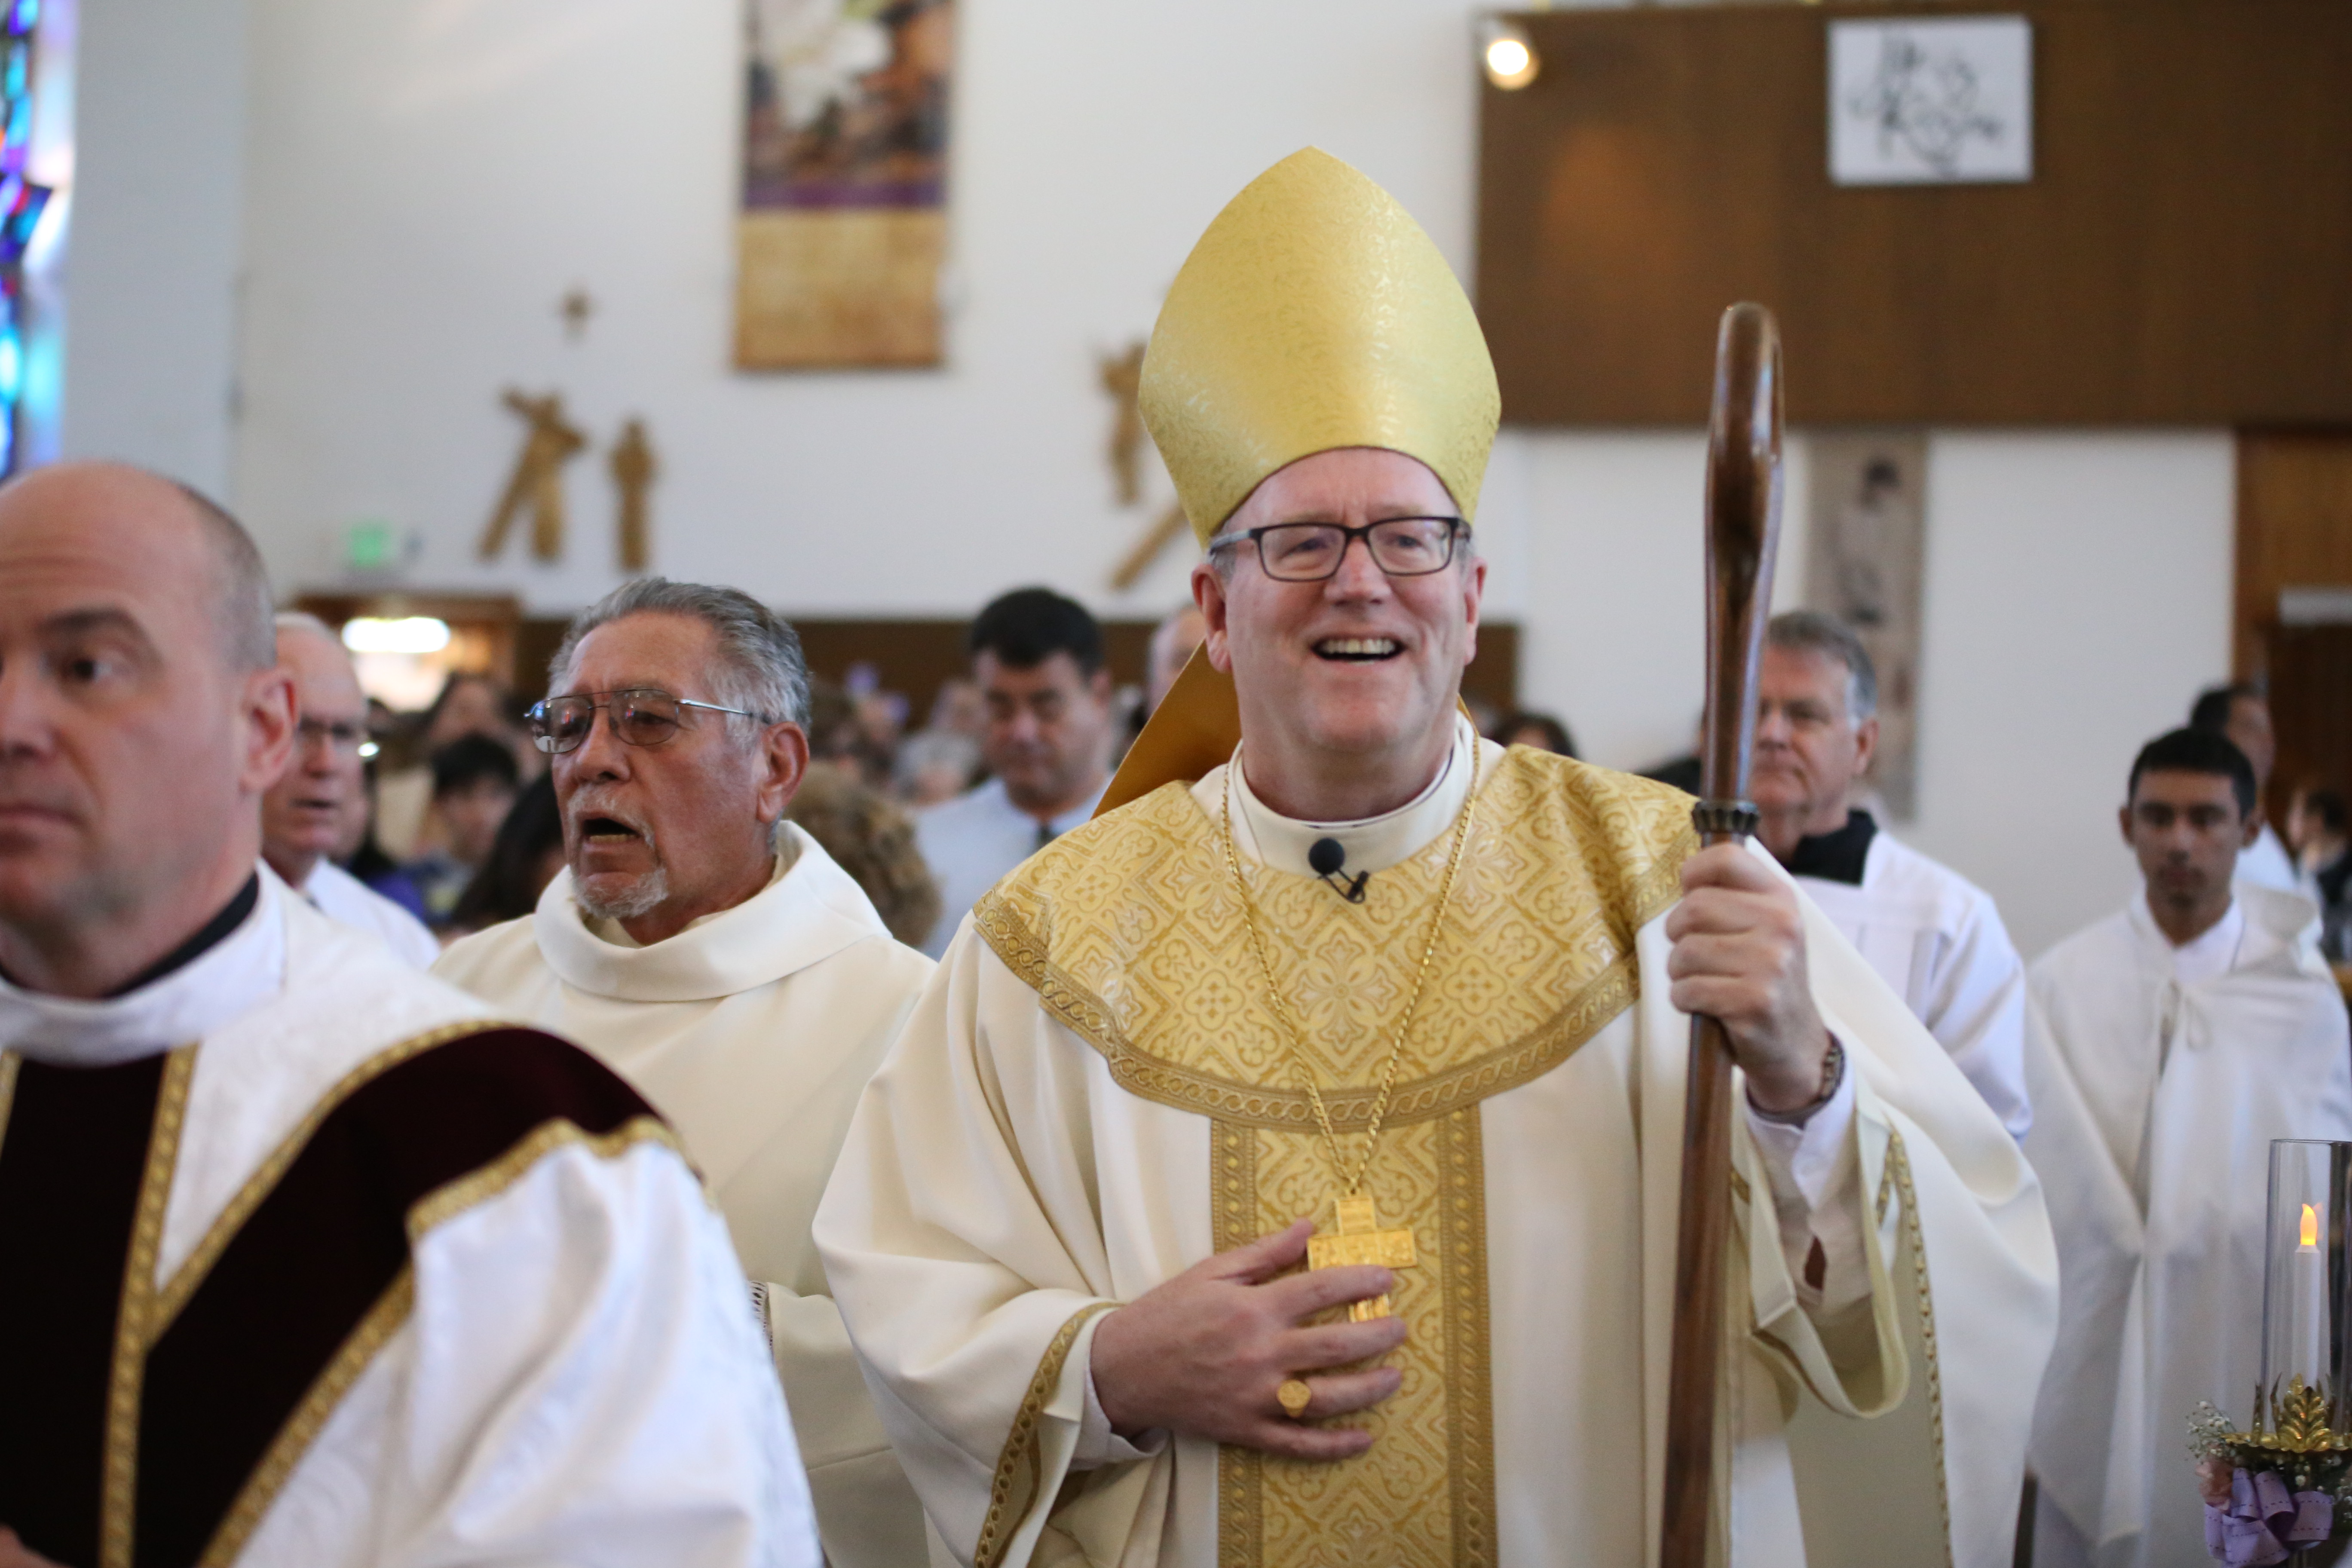 Bishop Barron smiling in a Mass procession